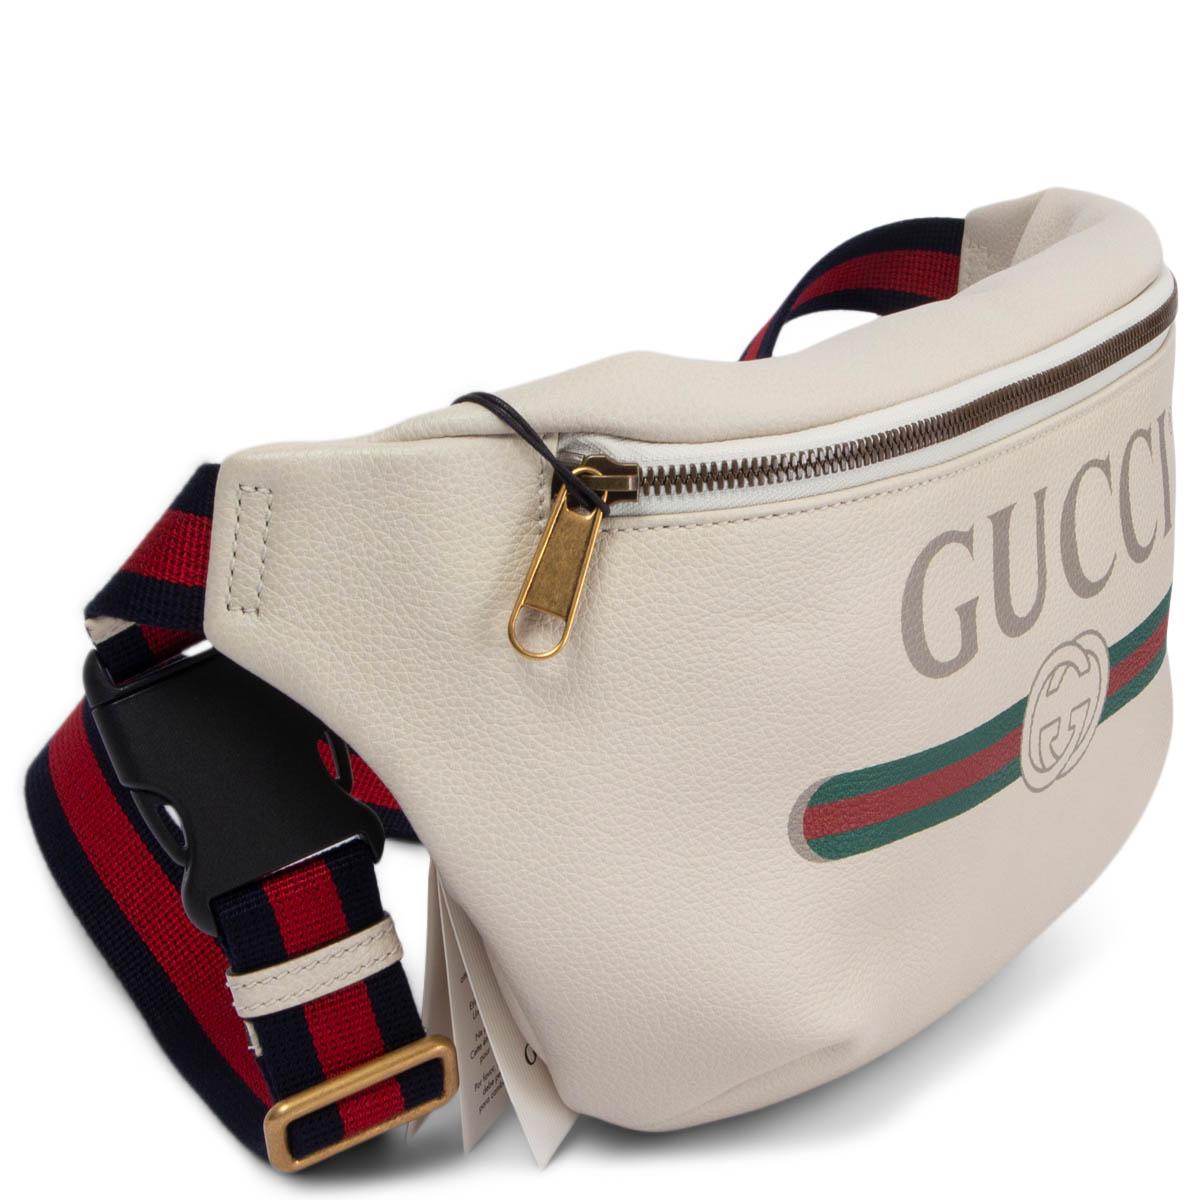 100% authentic Gucci belt bag in ivory leather with oversized logo. Adjustable red and blue web stripe canvas belt strap. Opens with a zipper on top. Lined in off-white canvas. Brand new.

Measurements
Height	18cm (7in)
Width	31cm (12.1in)
Depth	7cm